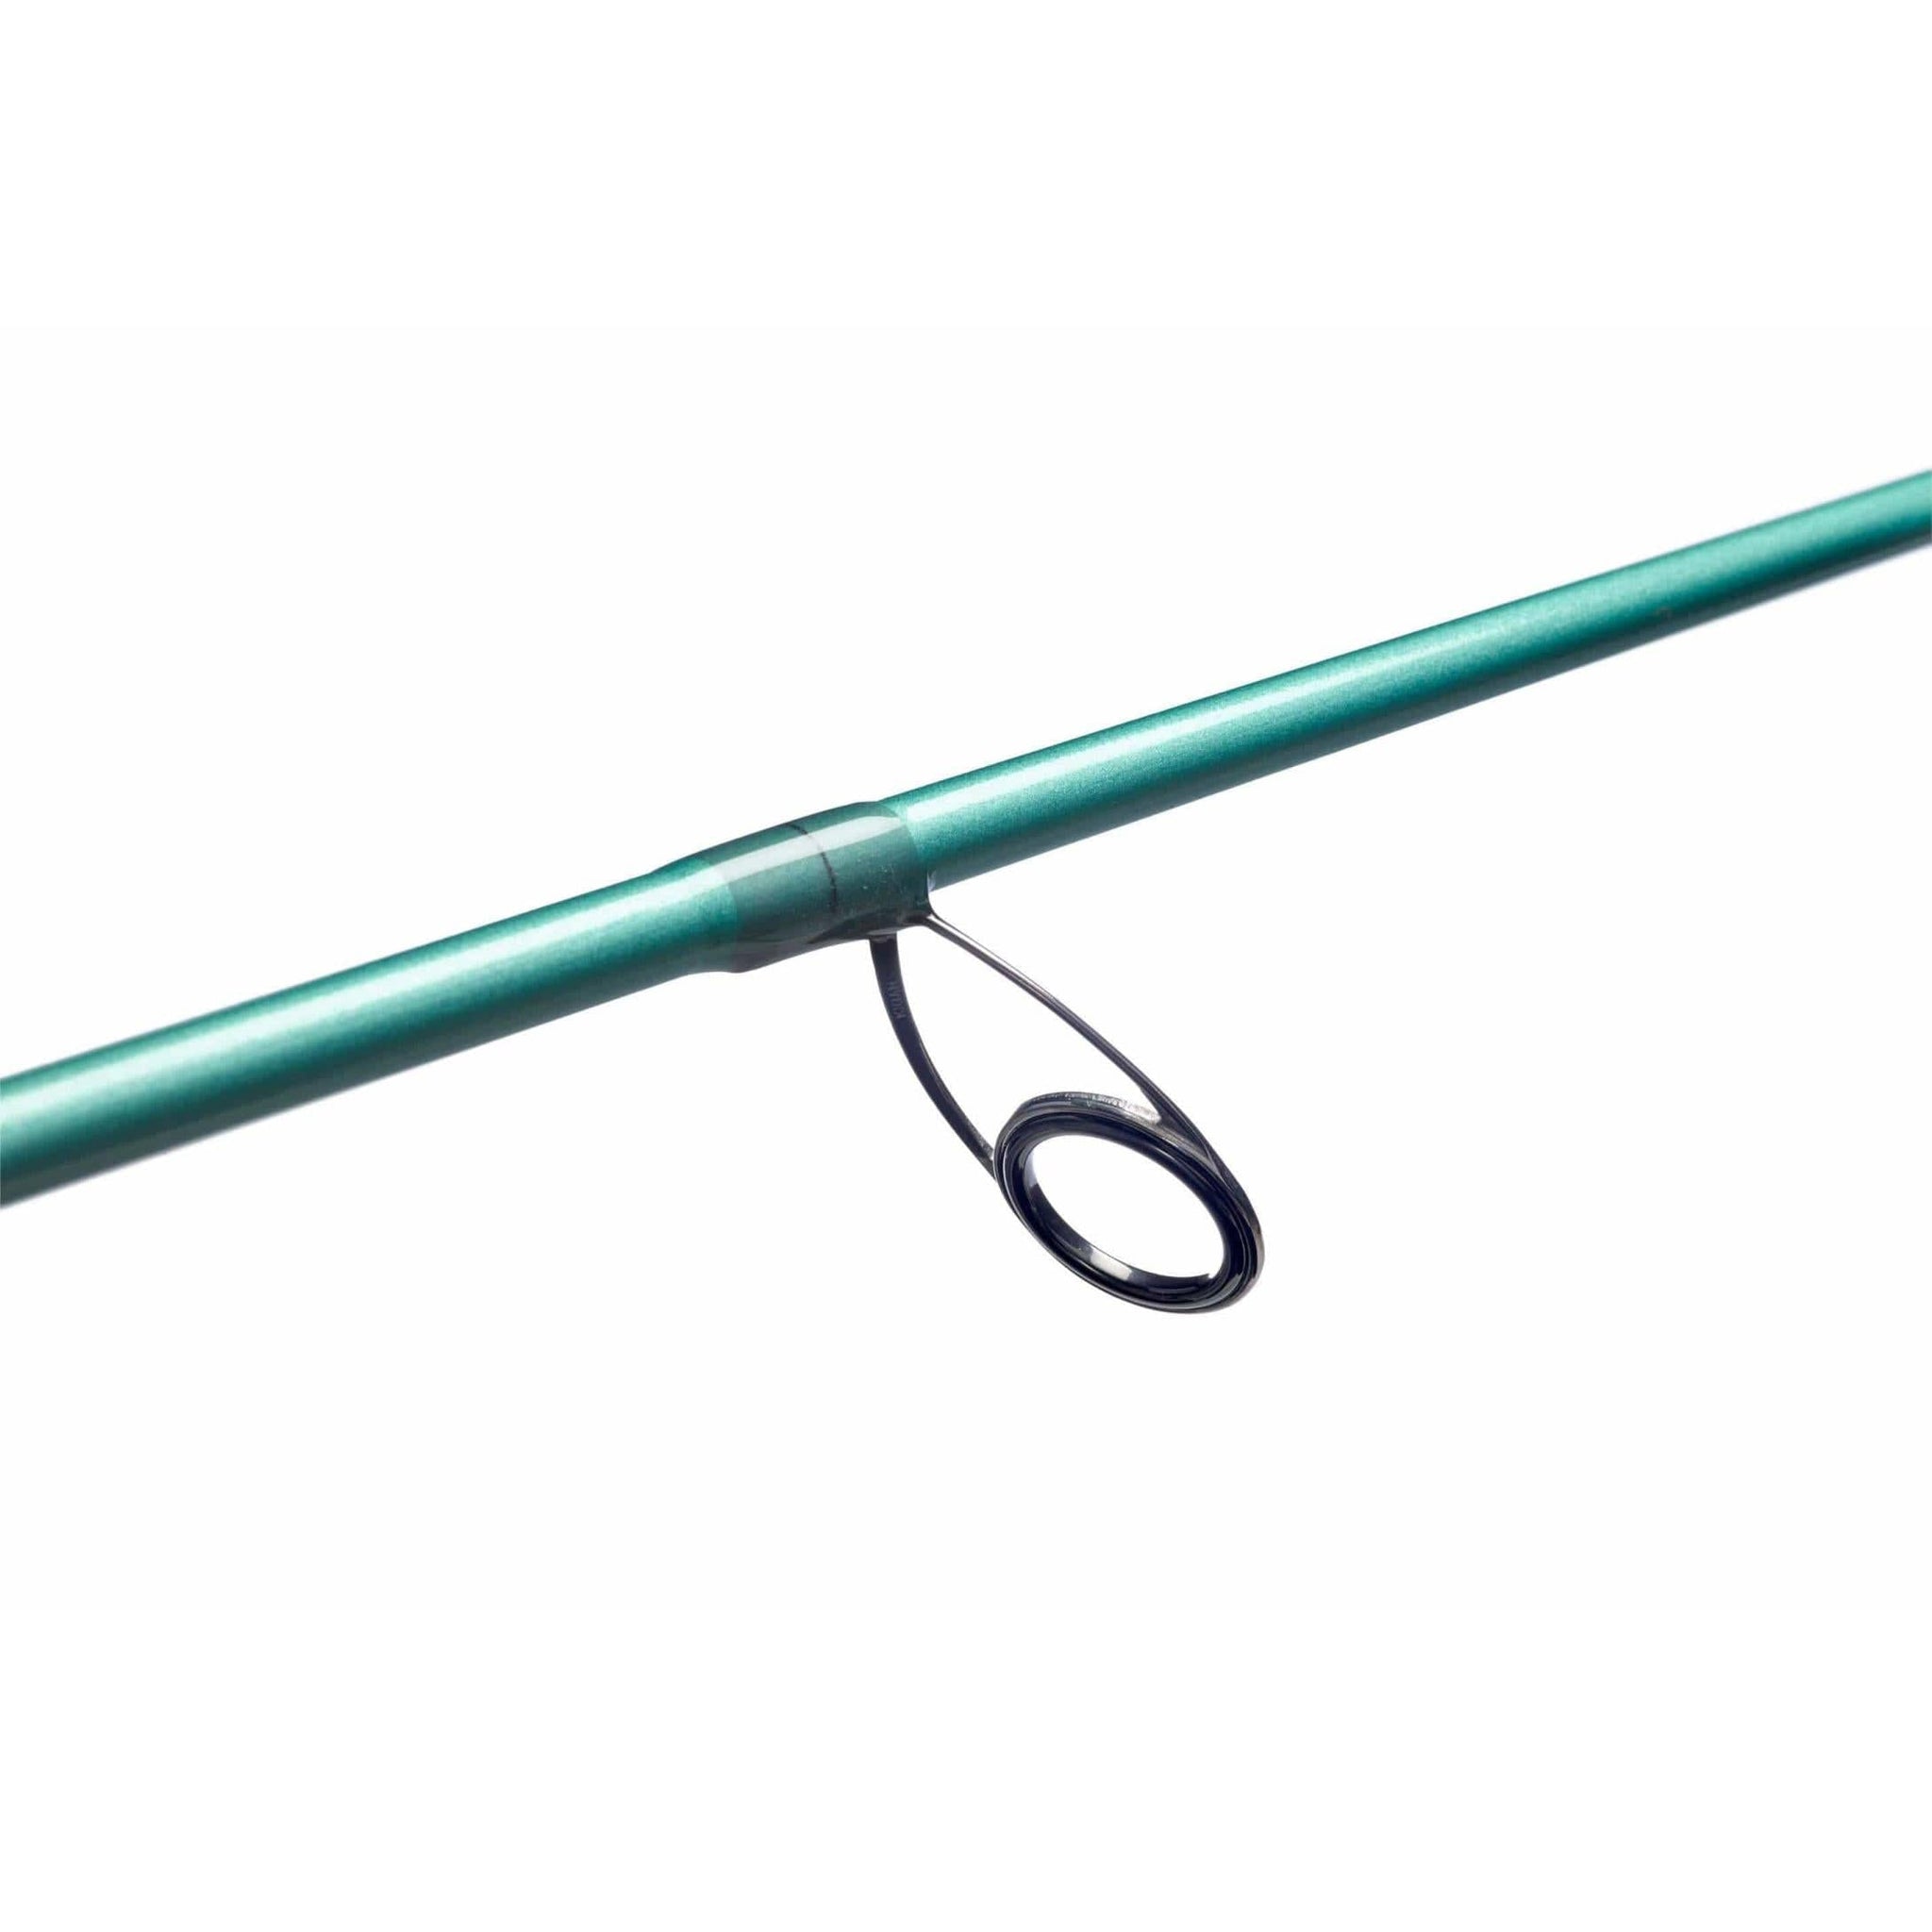 St. Croix Avid Inshore Spinning Rods - The Saltwater Edge